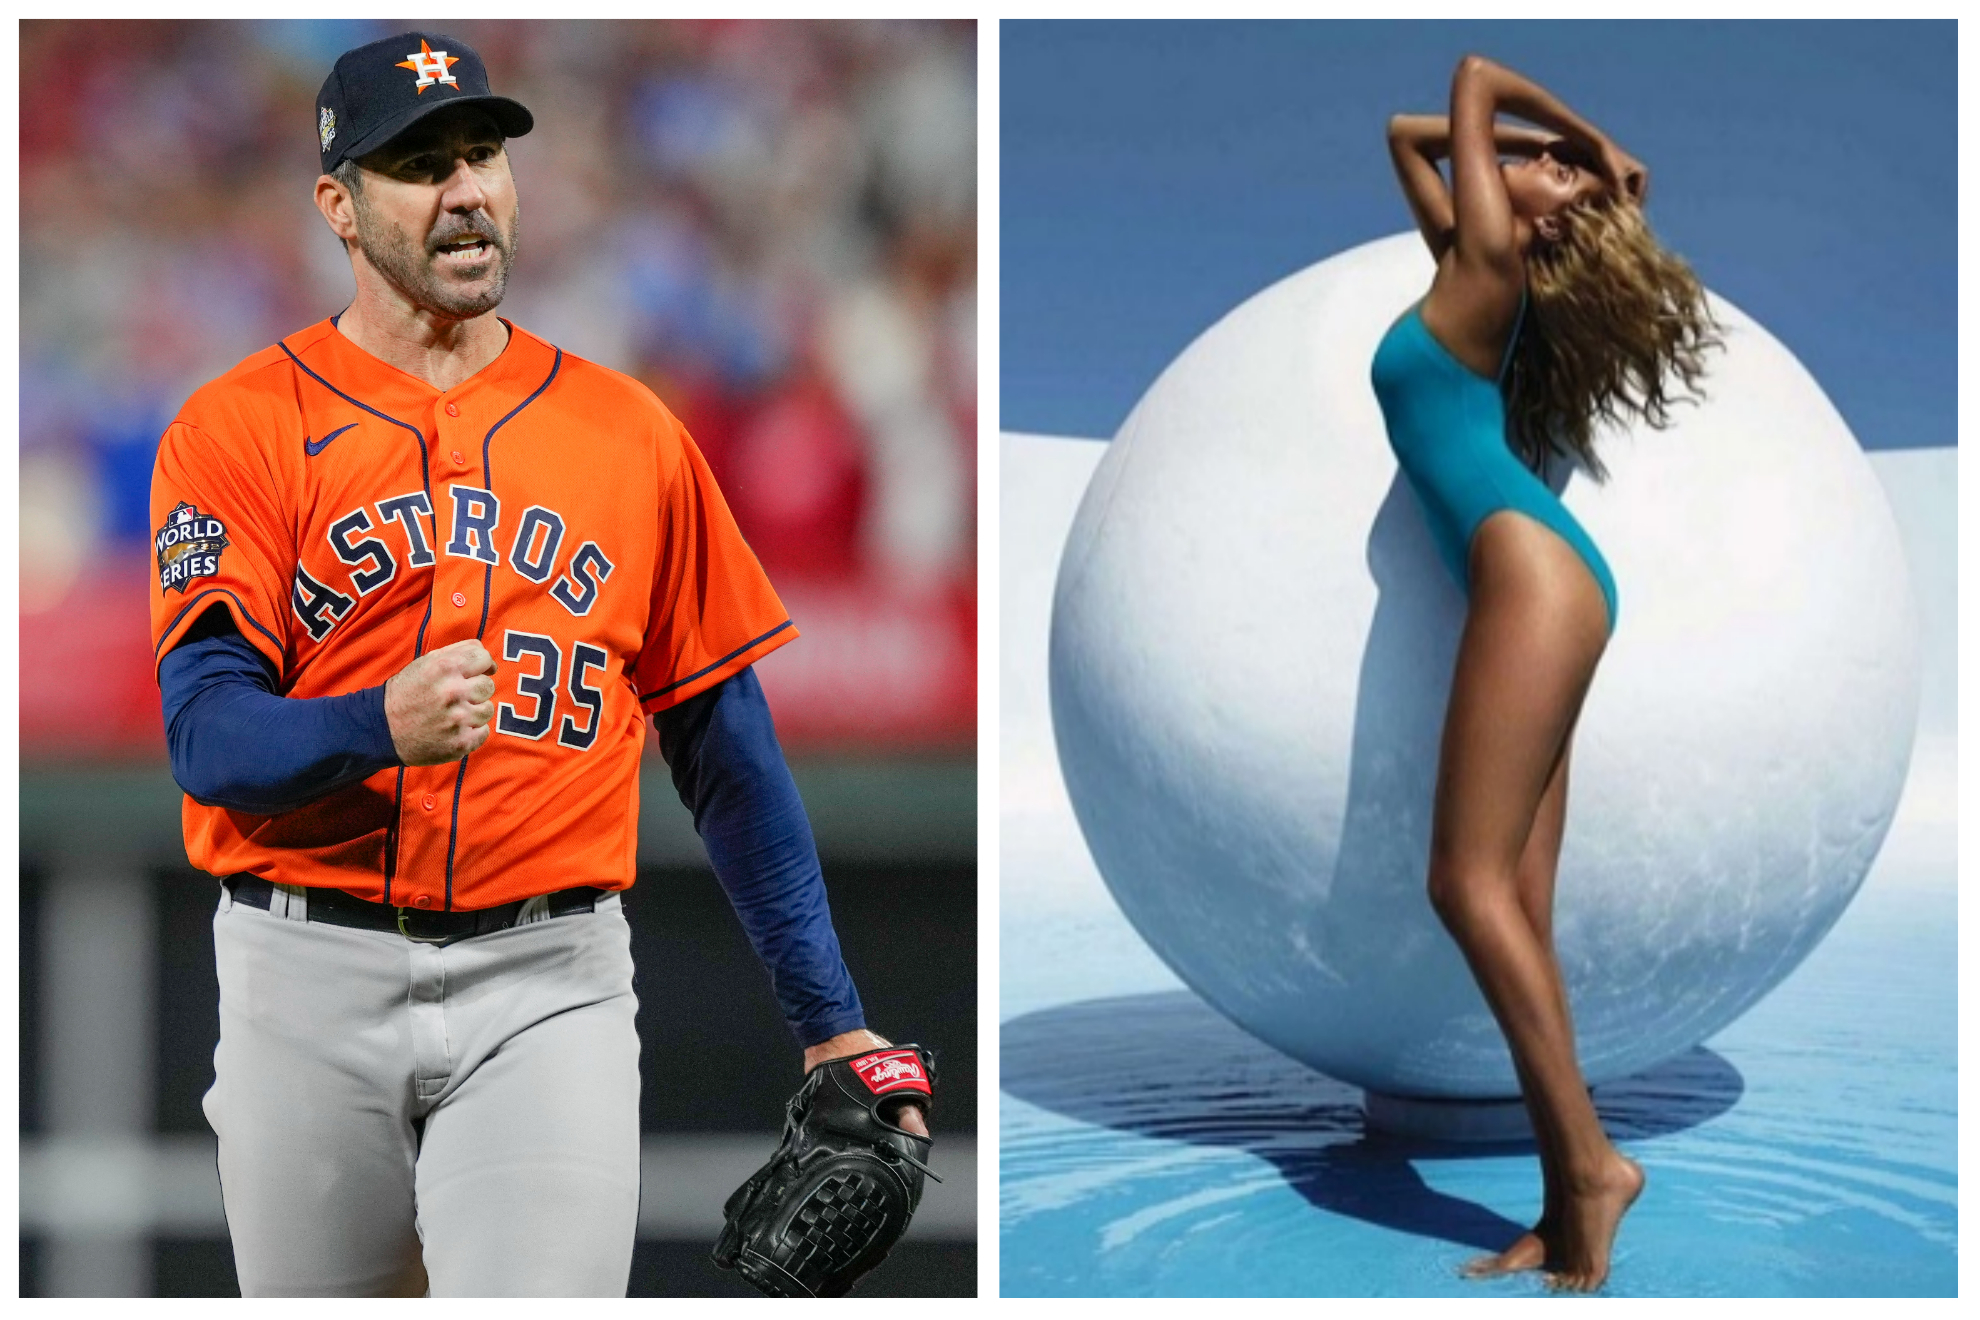 Phillies fans tried it all, not even Kate Upton chants could faze